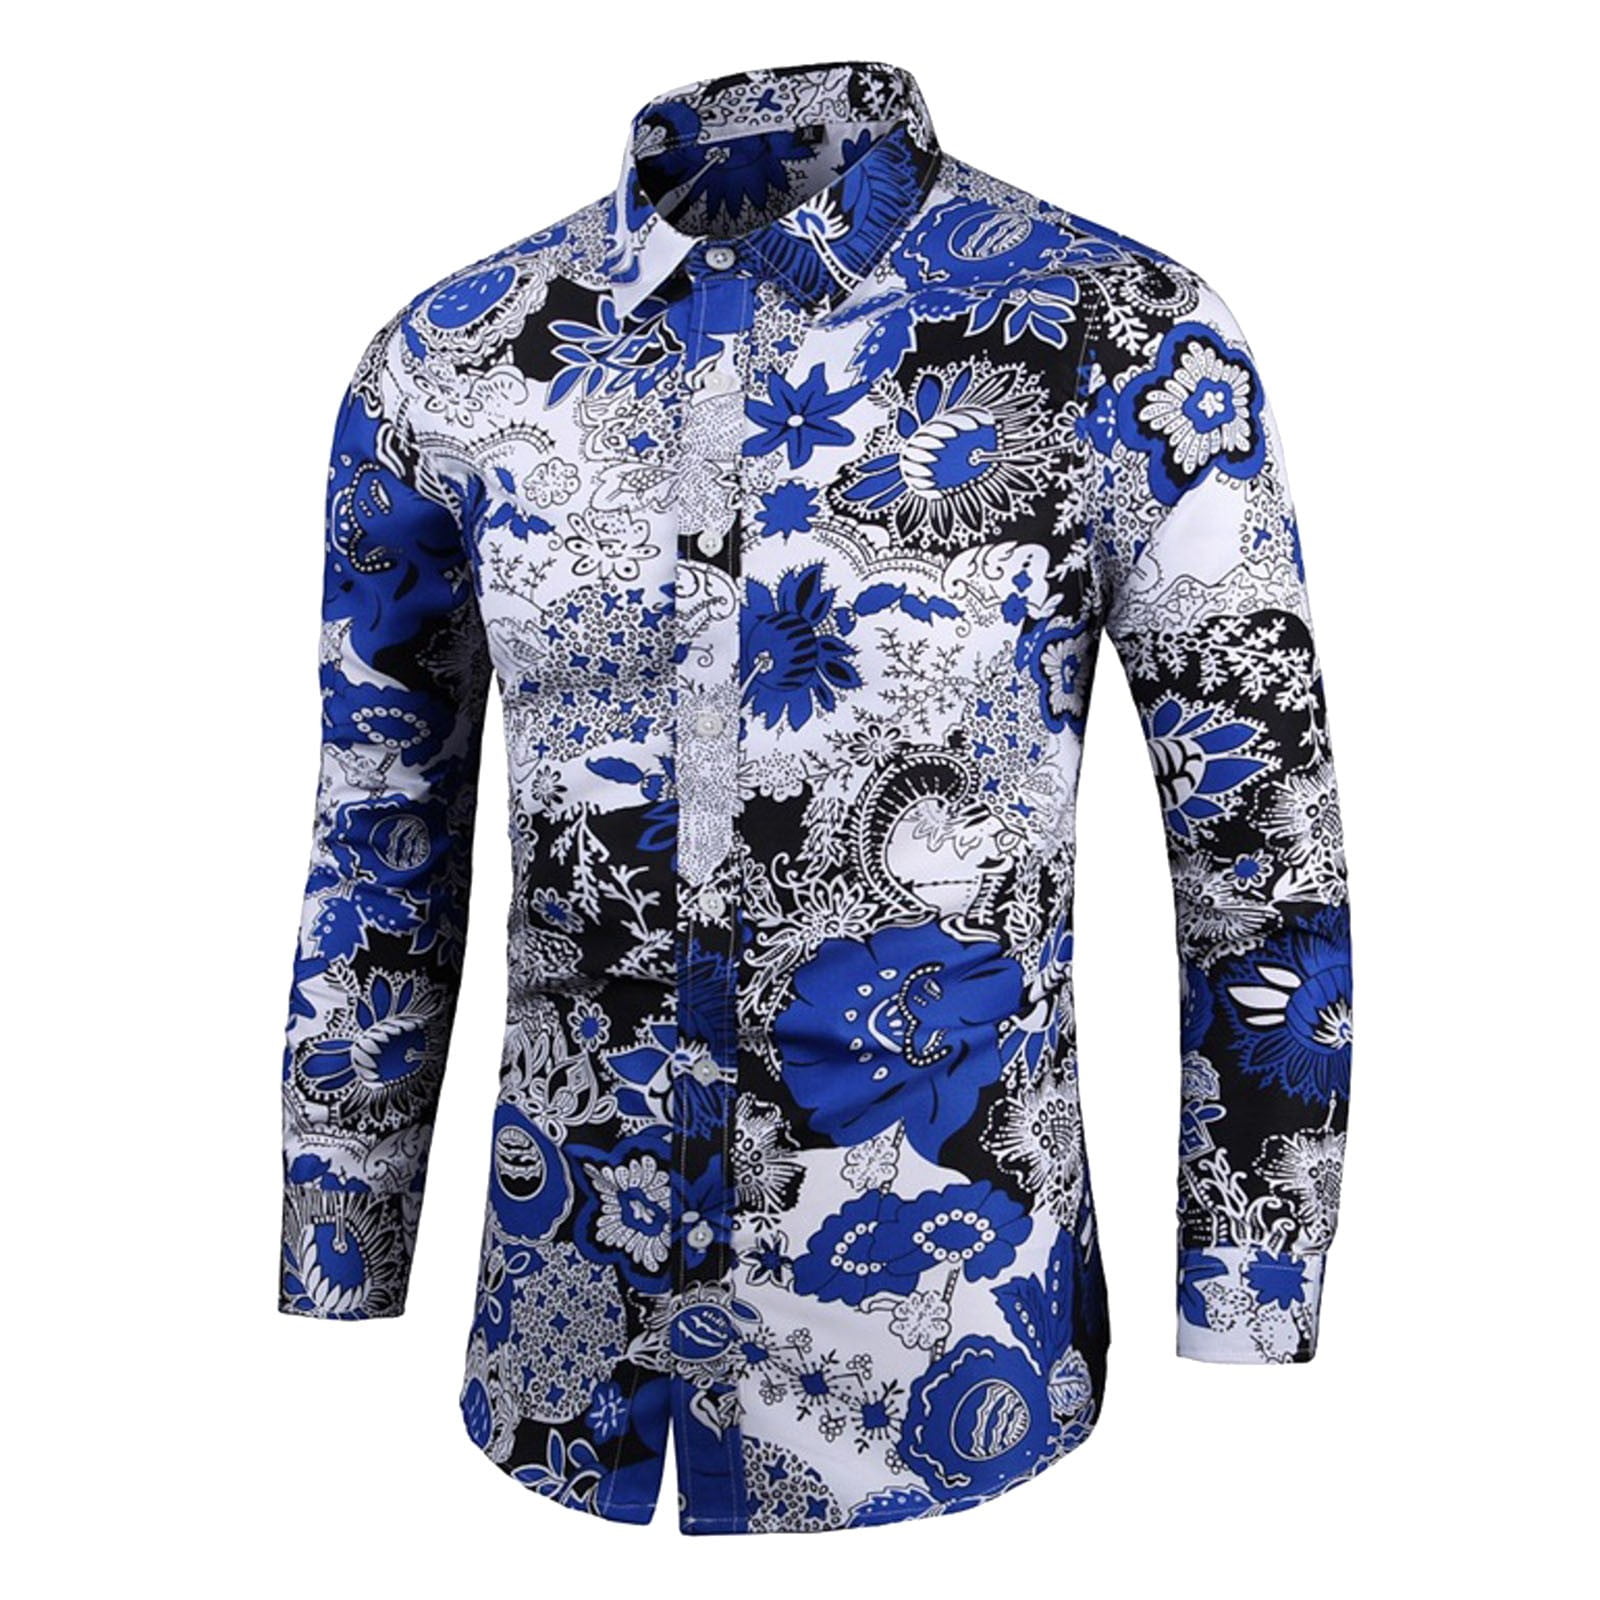 fohemr Mens Floral Shirt Casual Button Down Long Sleeve Flower Printed Shirt  100% Cotton Green Floral Print XX-Large - ShopStyle